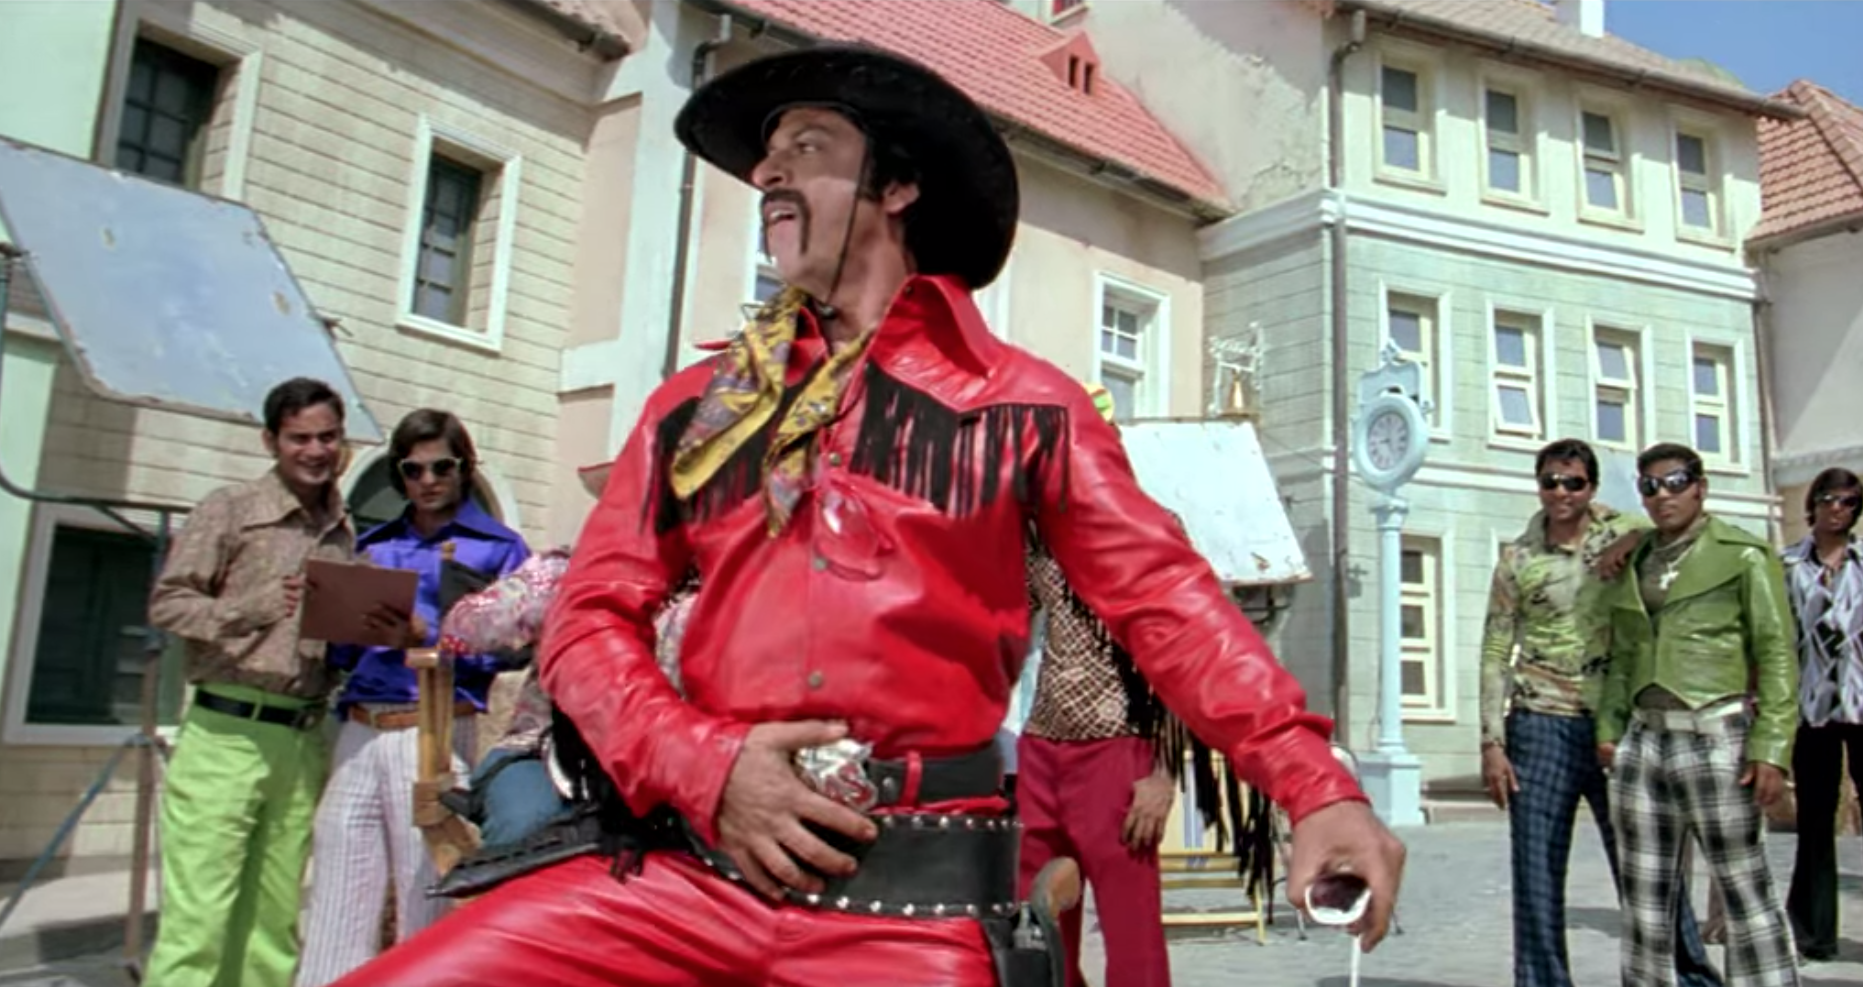 Om wears a red leather cowboy outfit with black tassels.